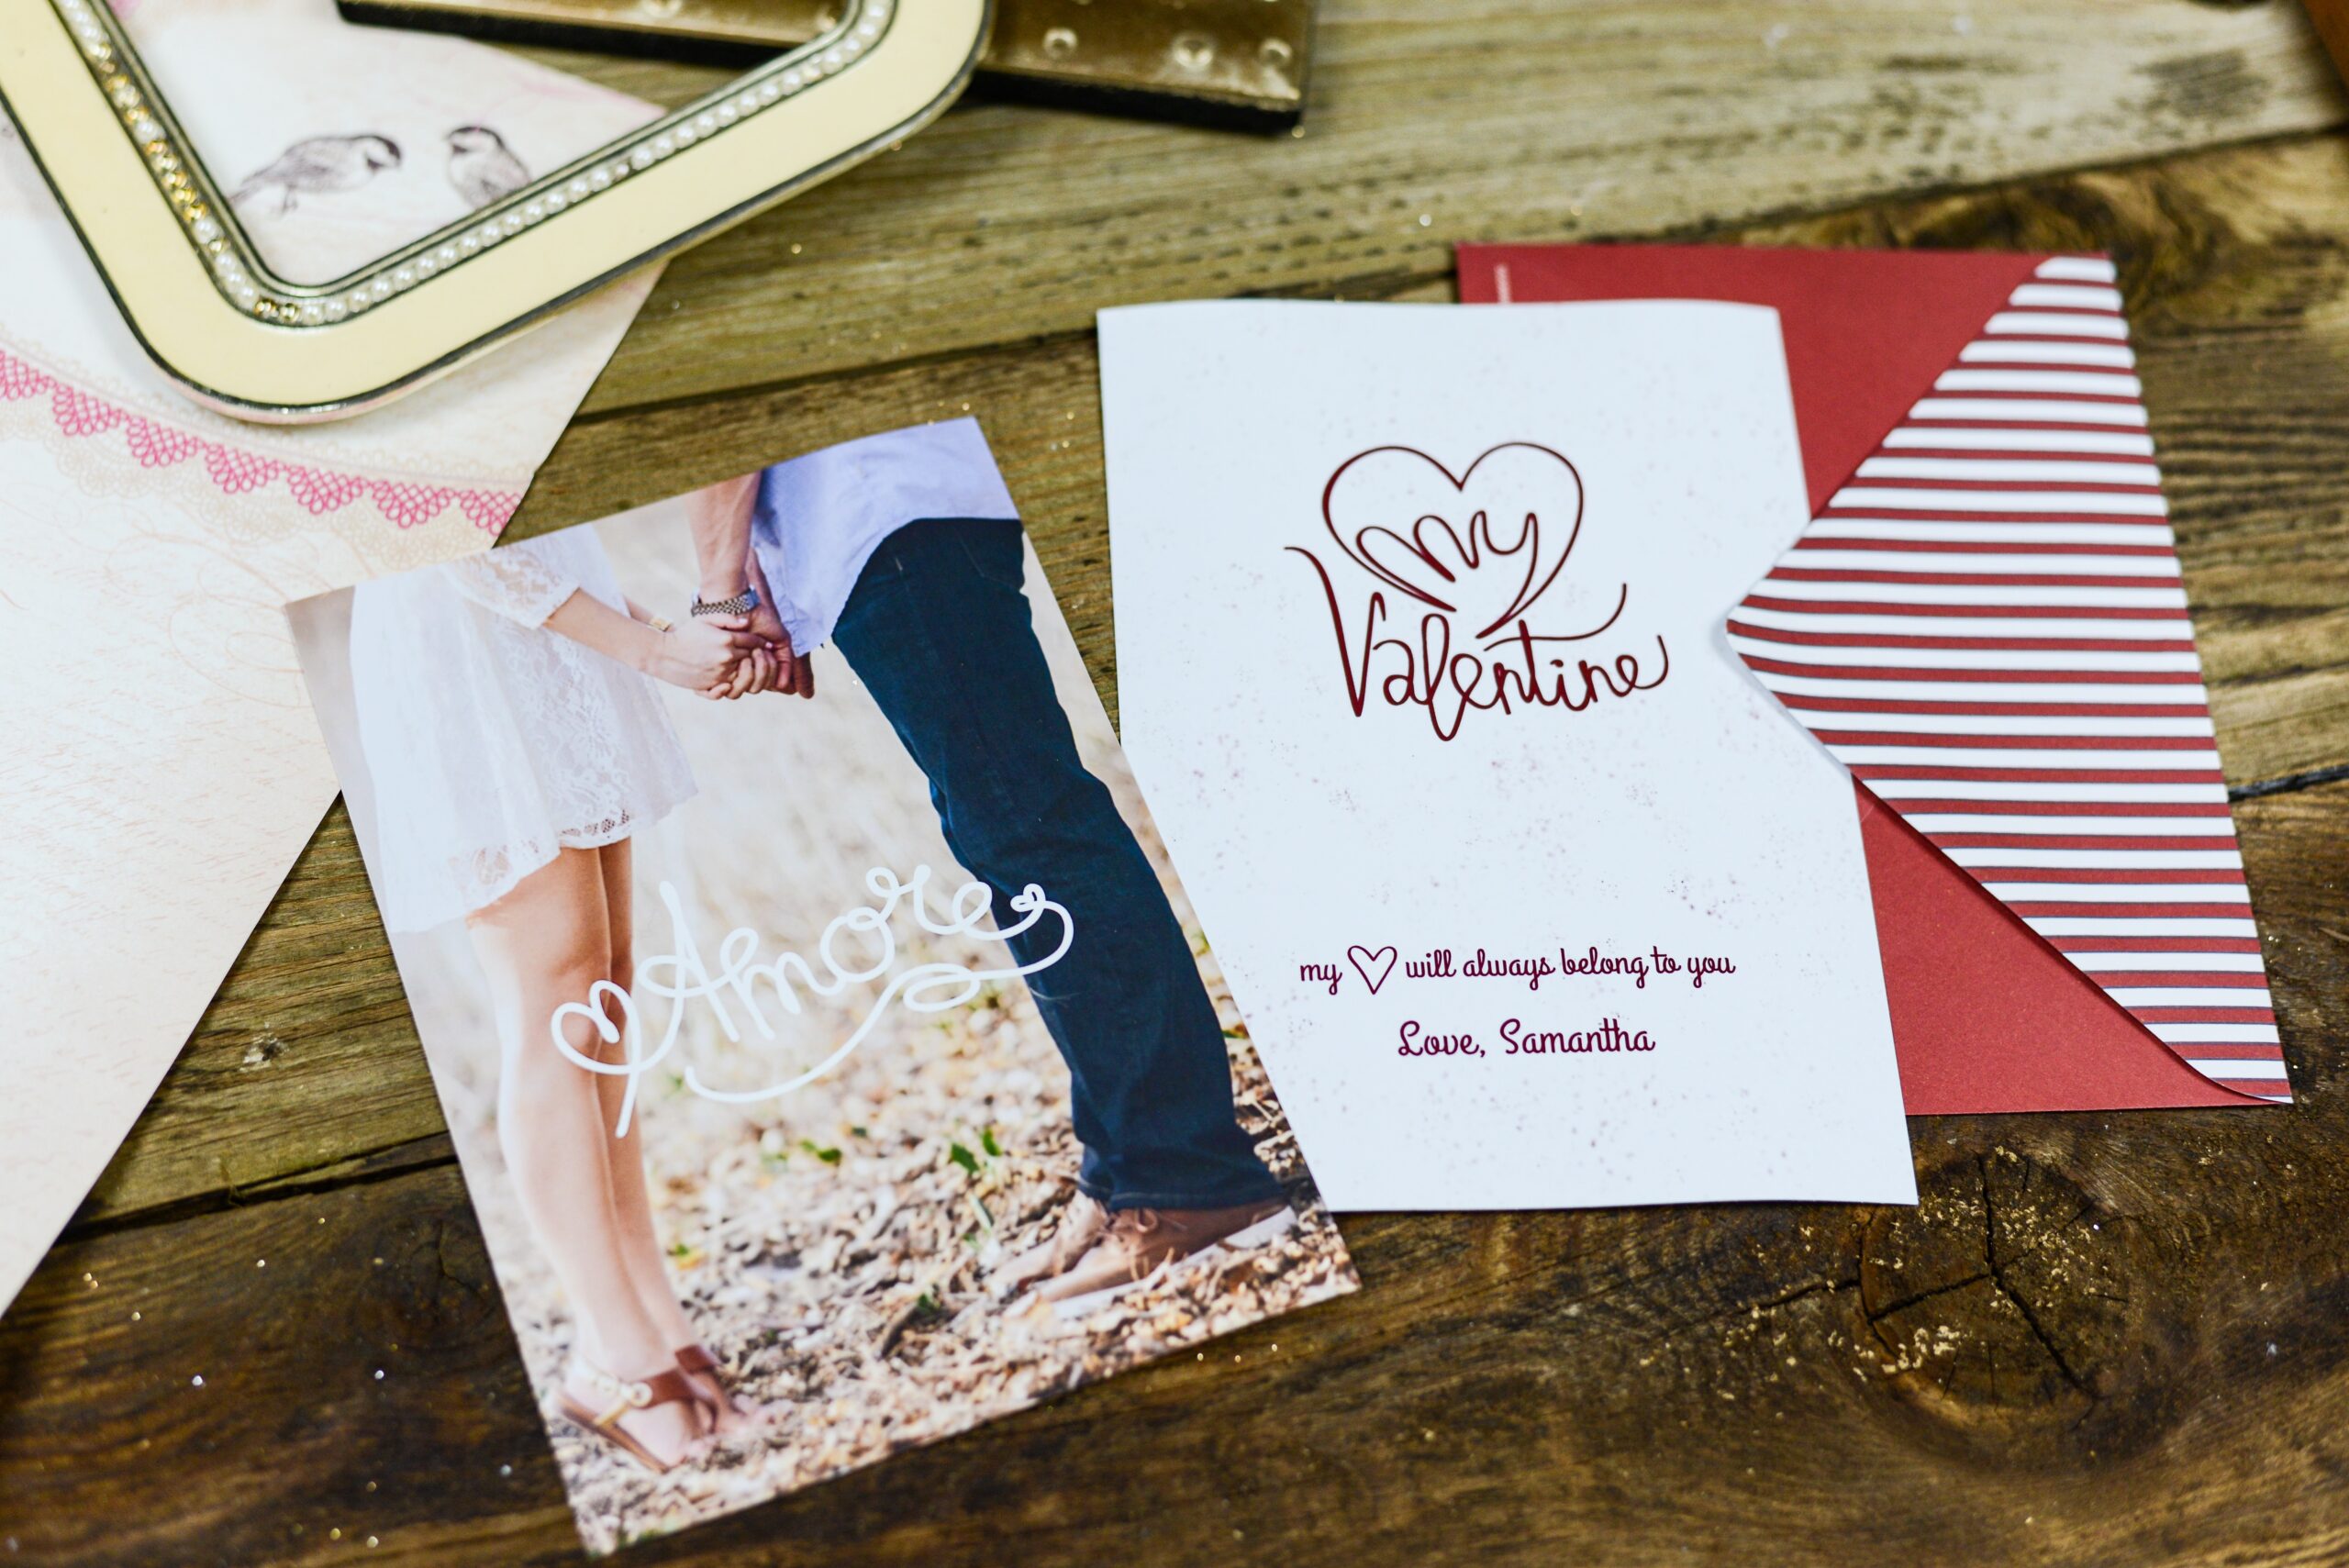 two valentine's day cards on wooden table.